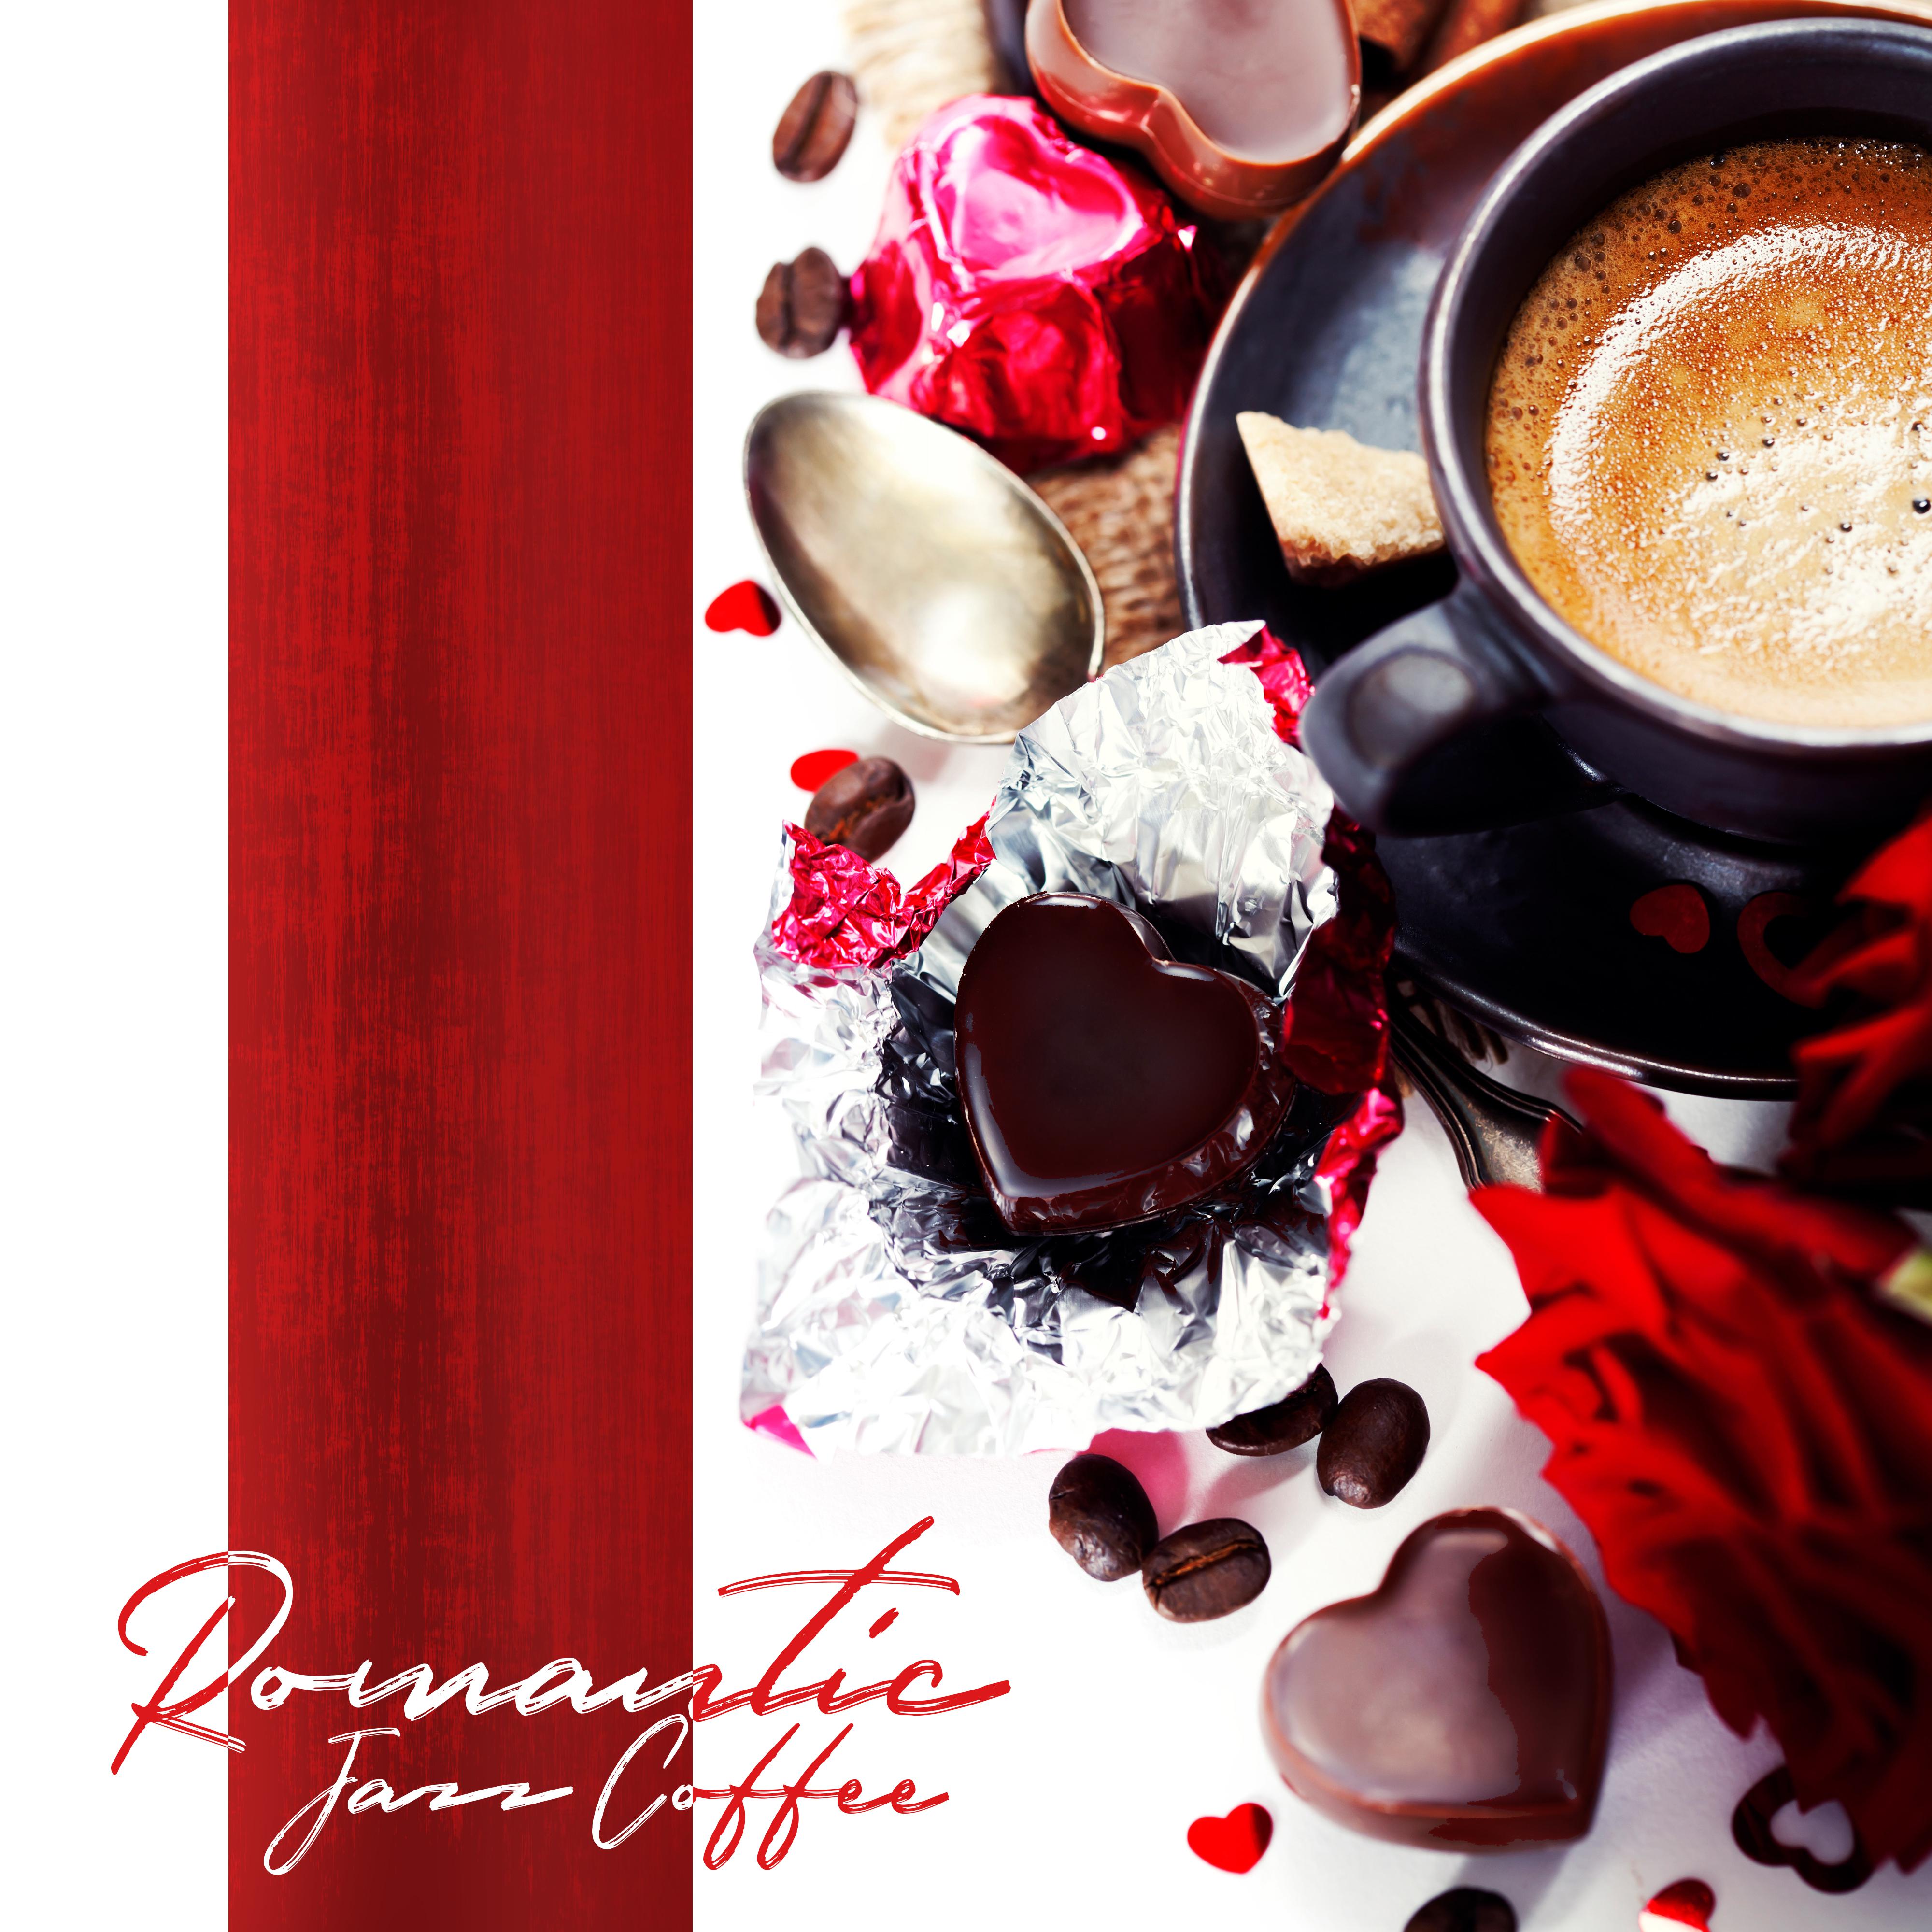 Romantic Jazz Coffee: ****** Melodies for ***, **** Sounds at Night, Making Love, Smooth Jazz for Two, Sensual Saxophone for Relax, Ambient Jazz